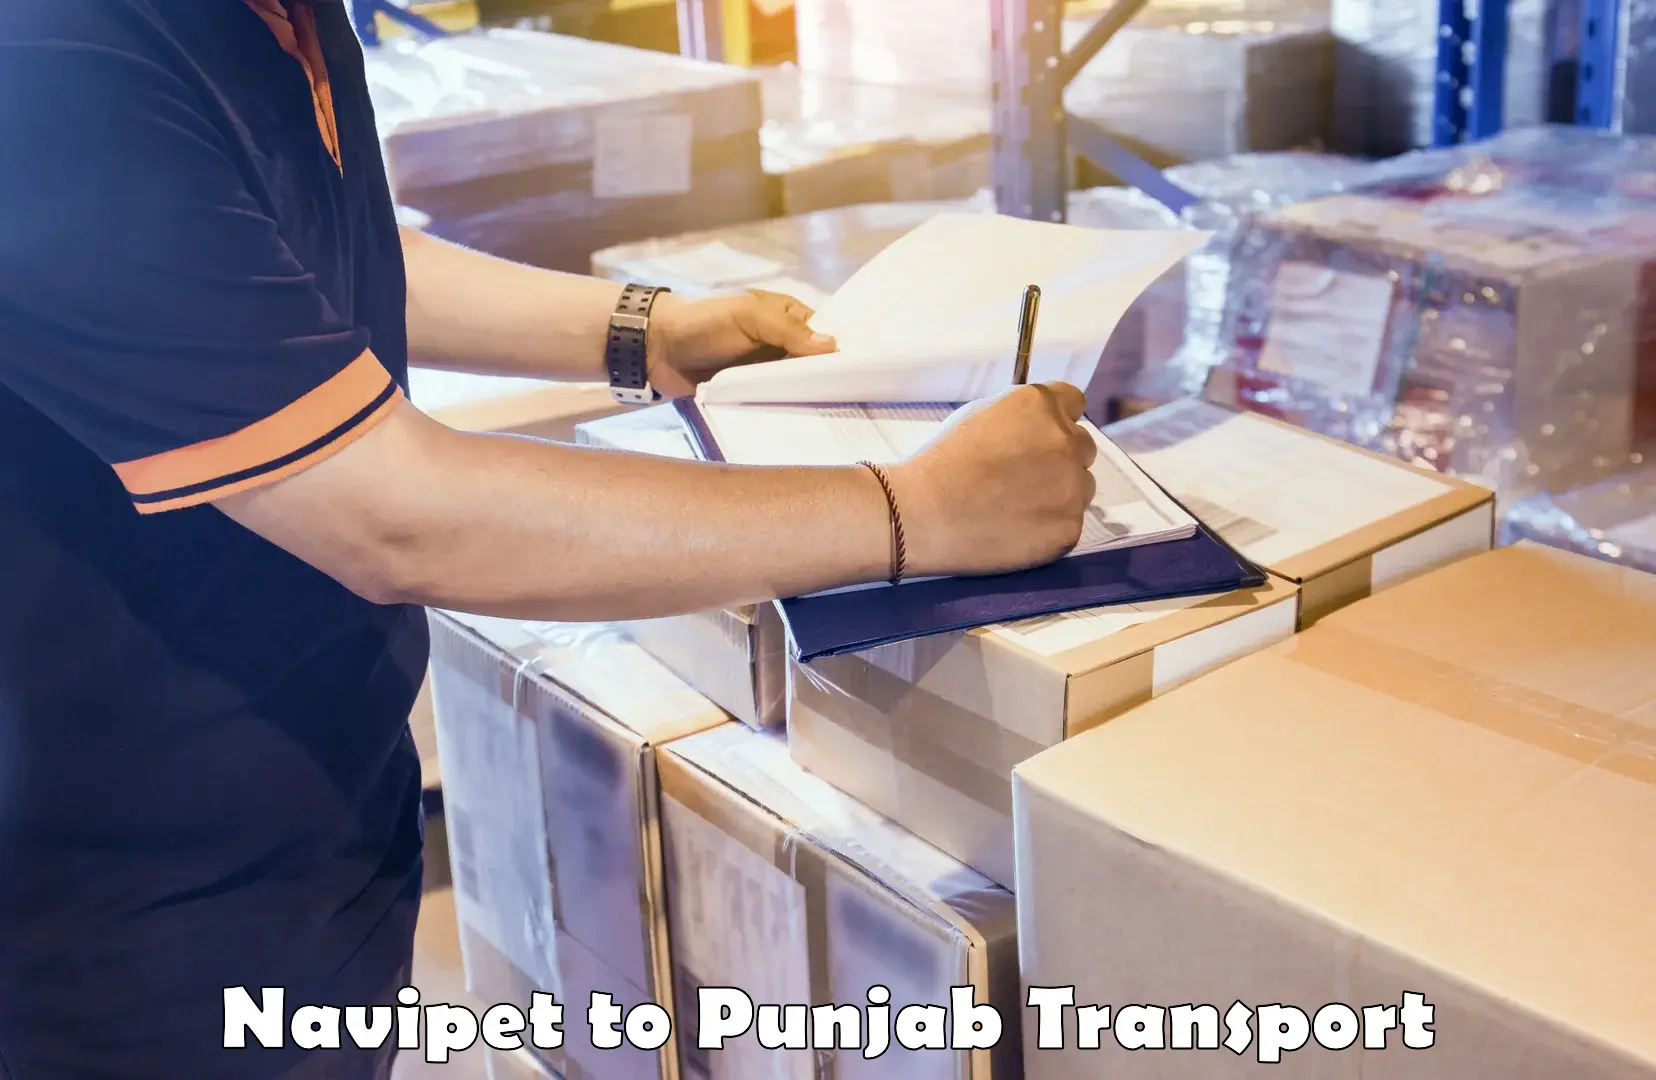 Goods delivery service Navipet to Patiala